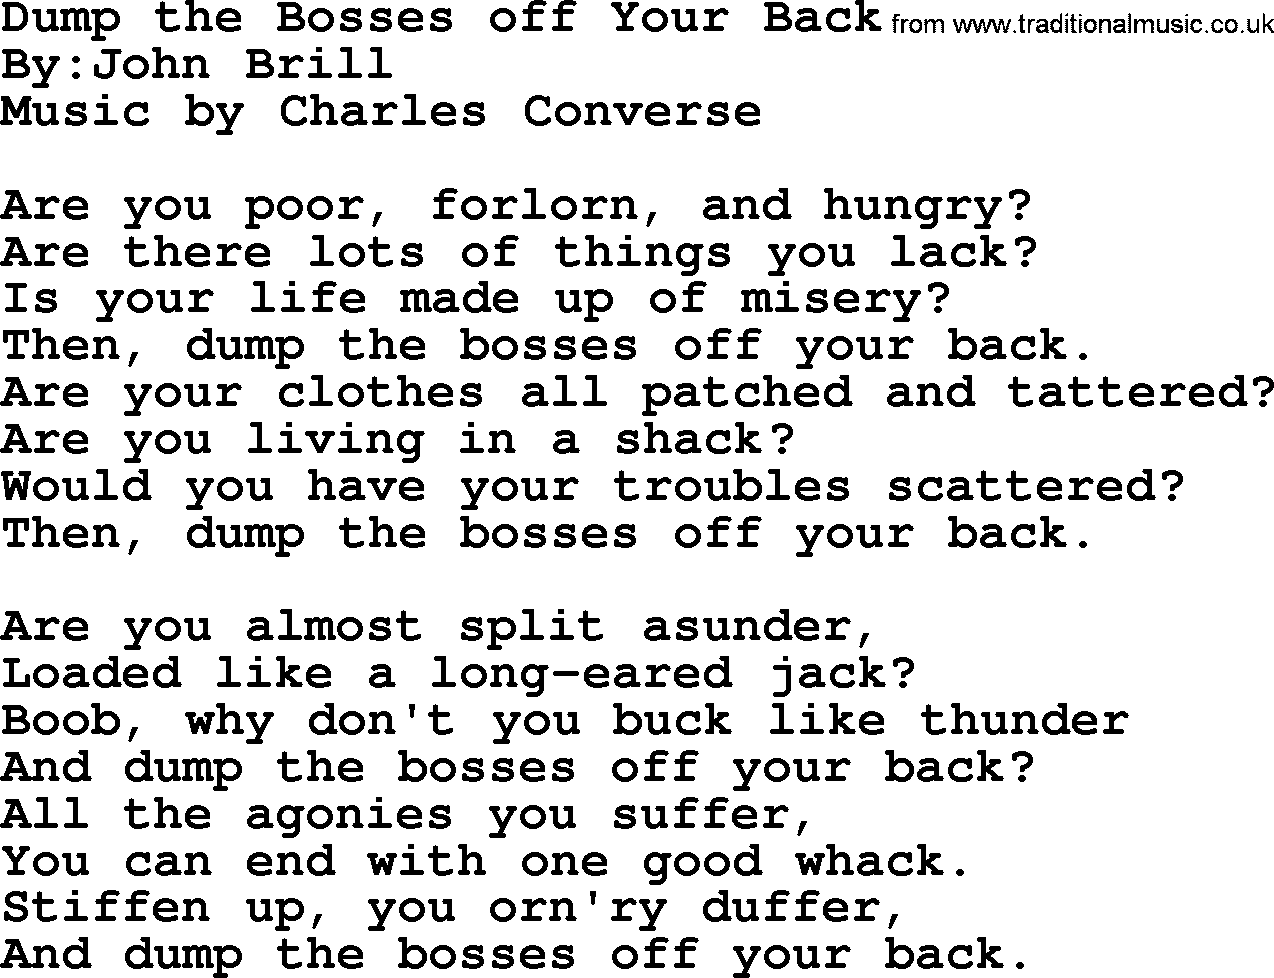 Political, Solidarity, Workers or Union song: Dump The Bosses Off Your Back, lyrics